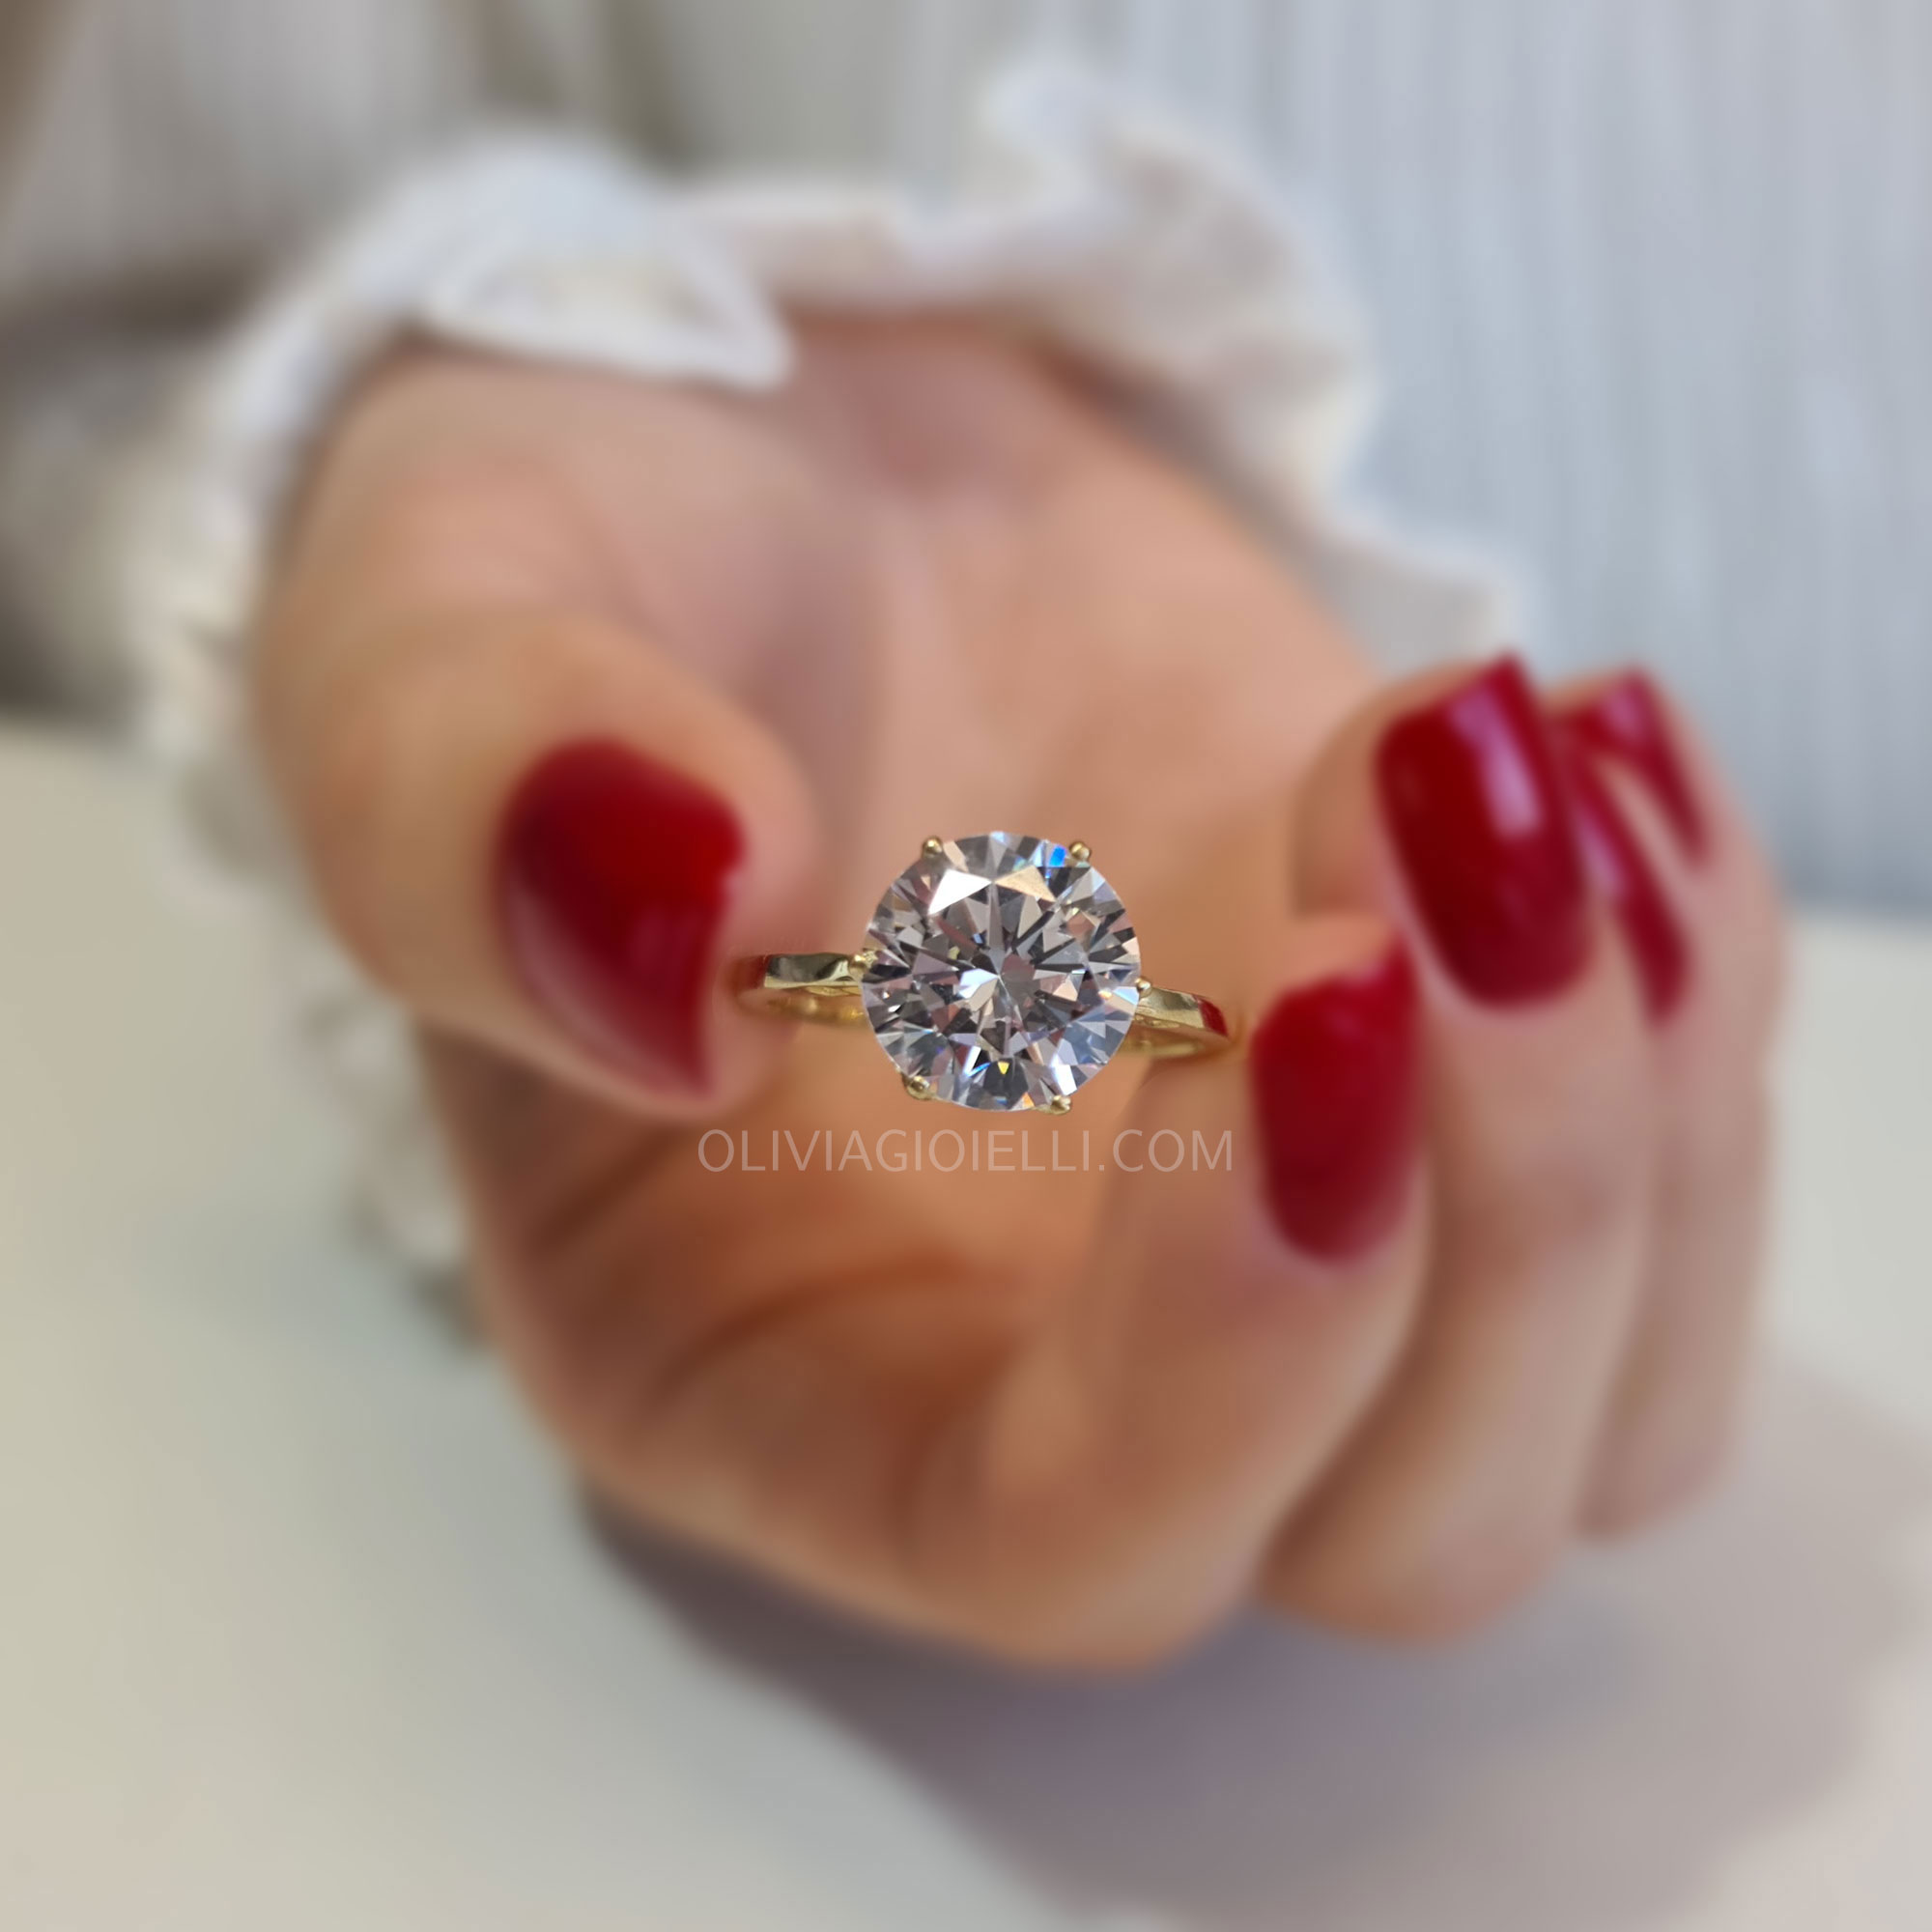 4 carat Round Cut Solitaire Engagement Ring